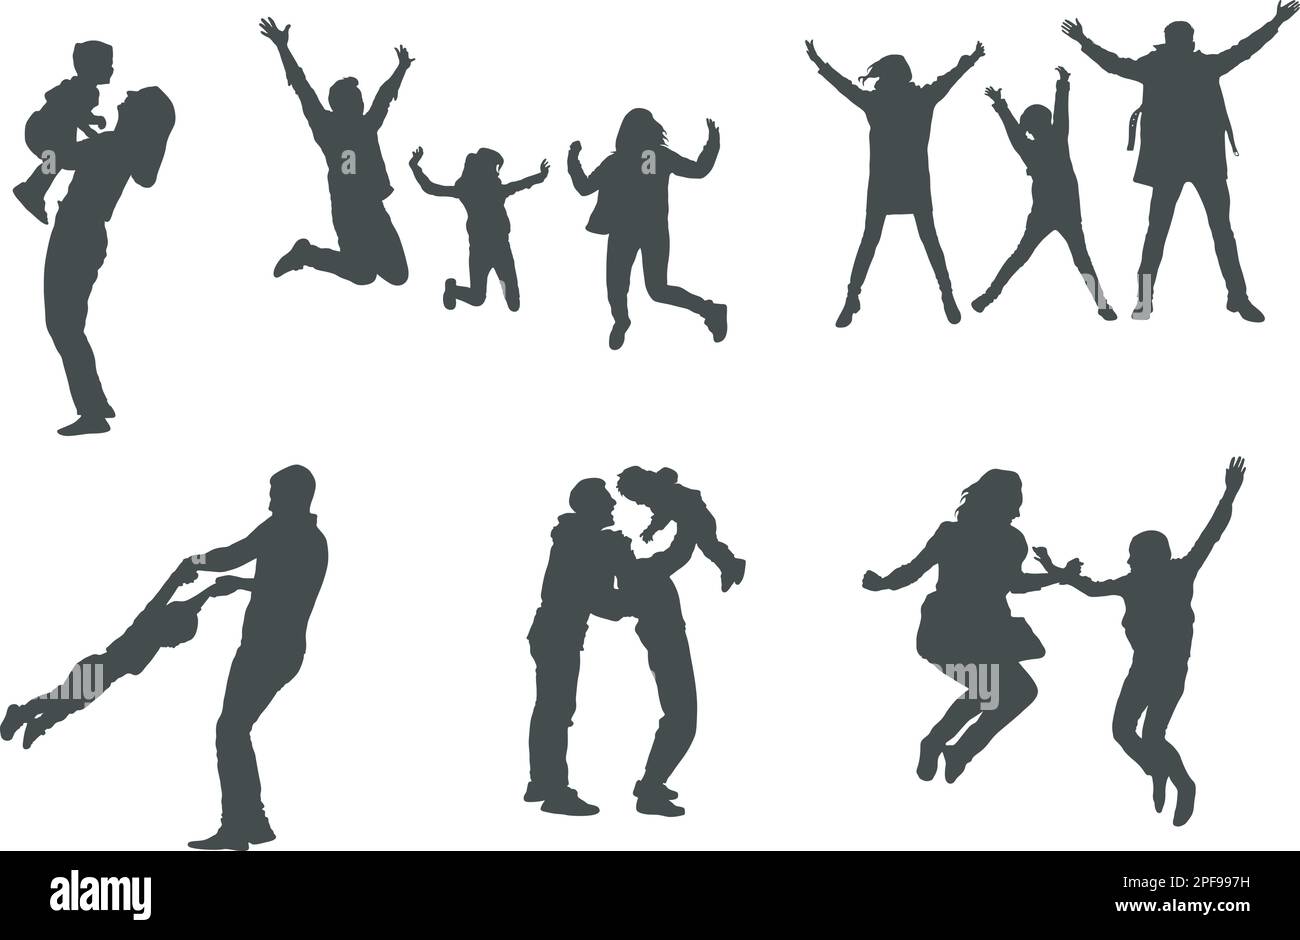 Happy Jumping Family Silhouette, Jumping Family Silhouette, Jumping Silhouette,  Happy Family Silhouettes, Happy  family jumping silhouettes Stock Vector